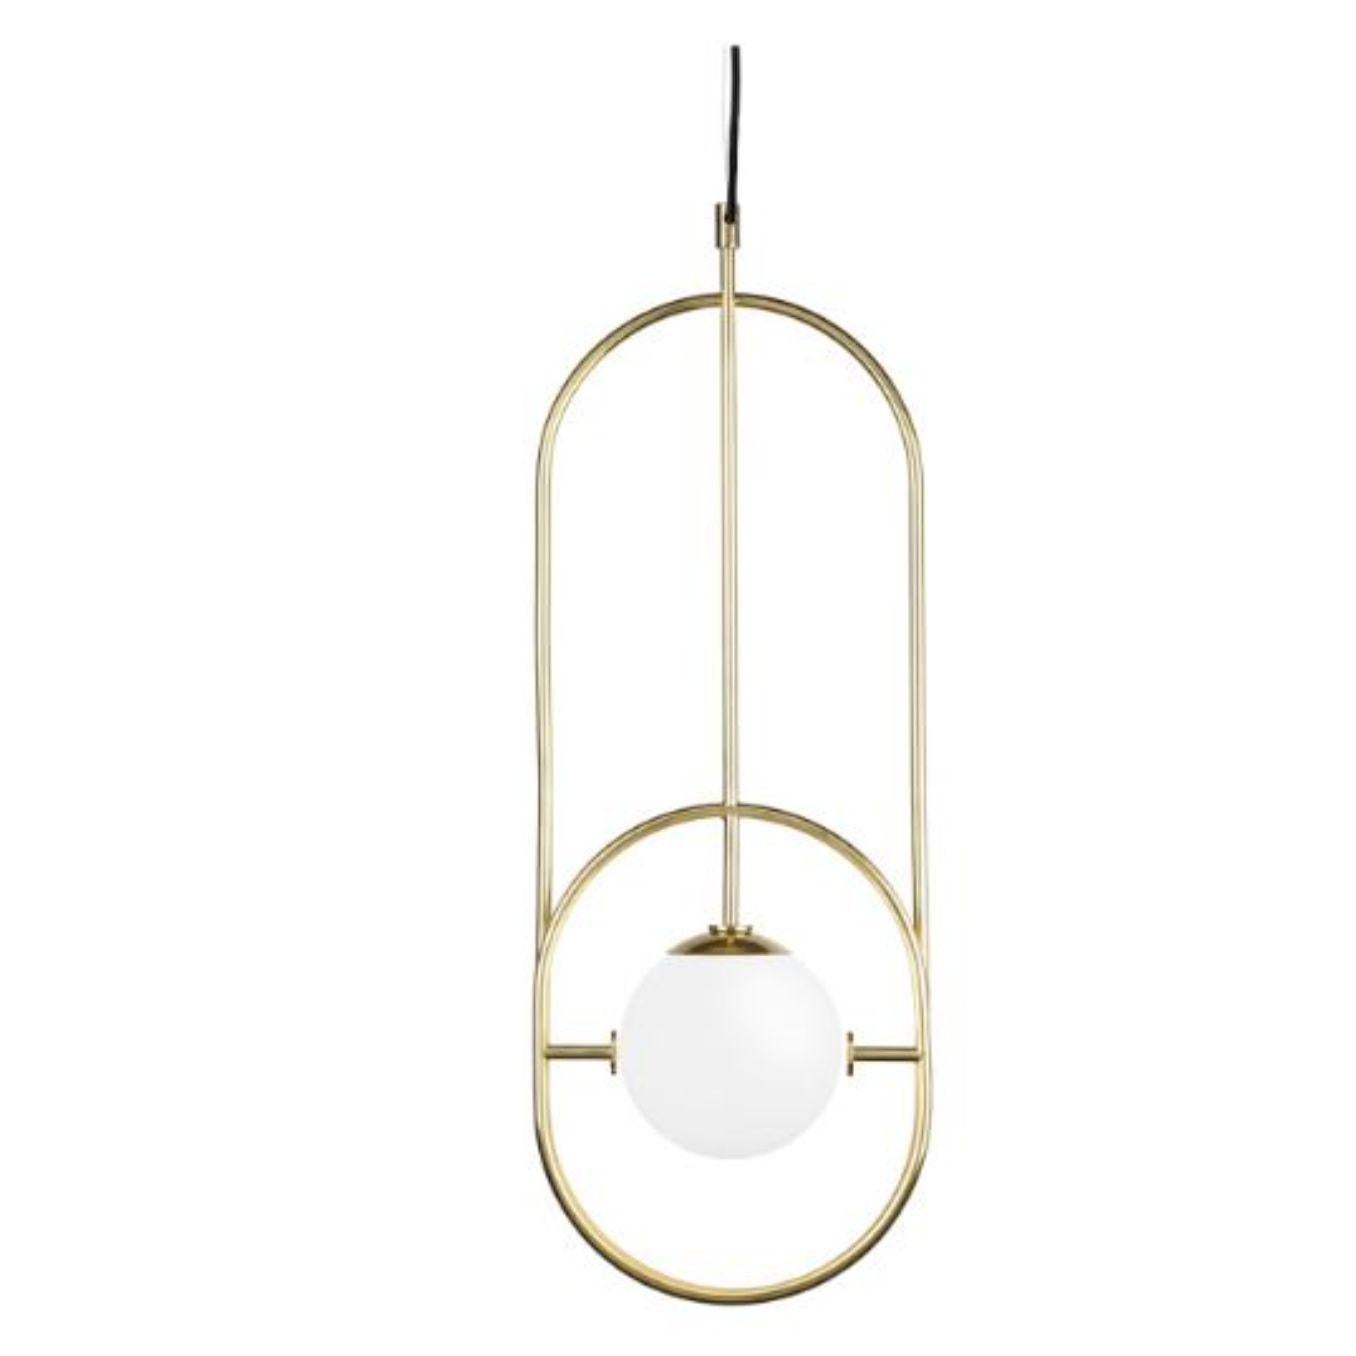 Brass loop I suspension lamp by Dooq.
Dimensions: W 26.5 x D 15 x H 73 cm.
Materials: lacquered metal, polished or brushed metal, brass.
Also available in different colours and materials.

Information:
230V/50Hz
1 x max. G9
4W LED

120V/60Hz
1 x